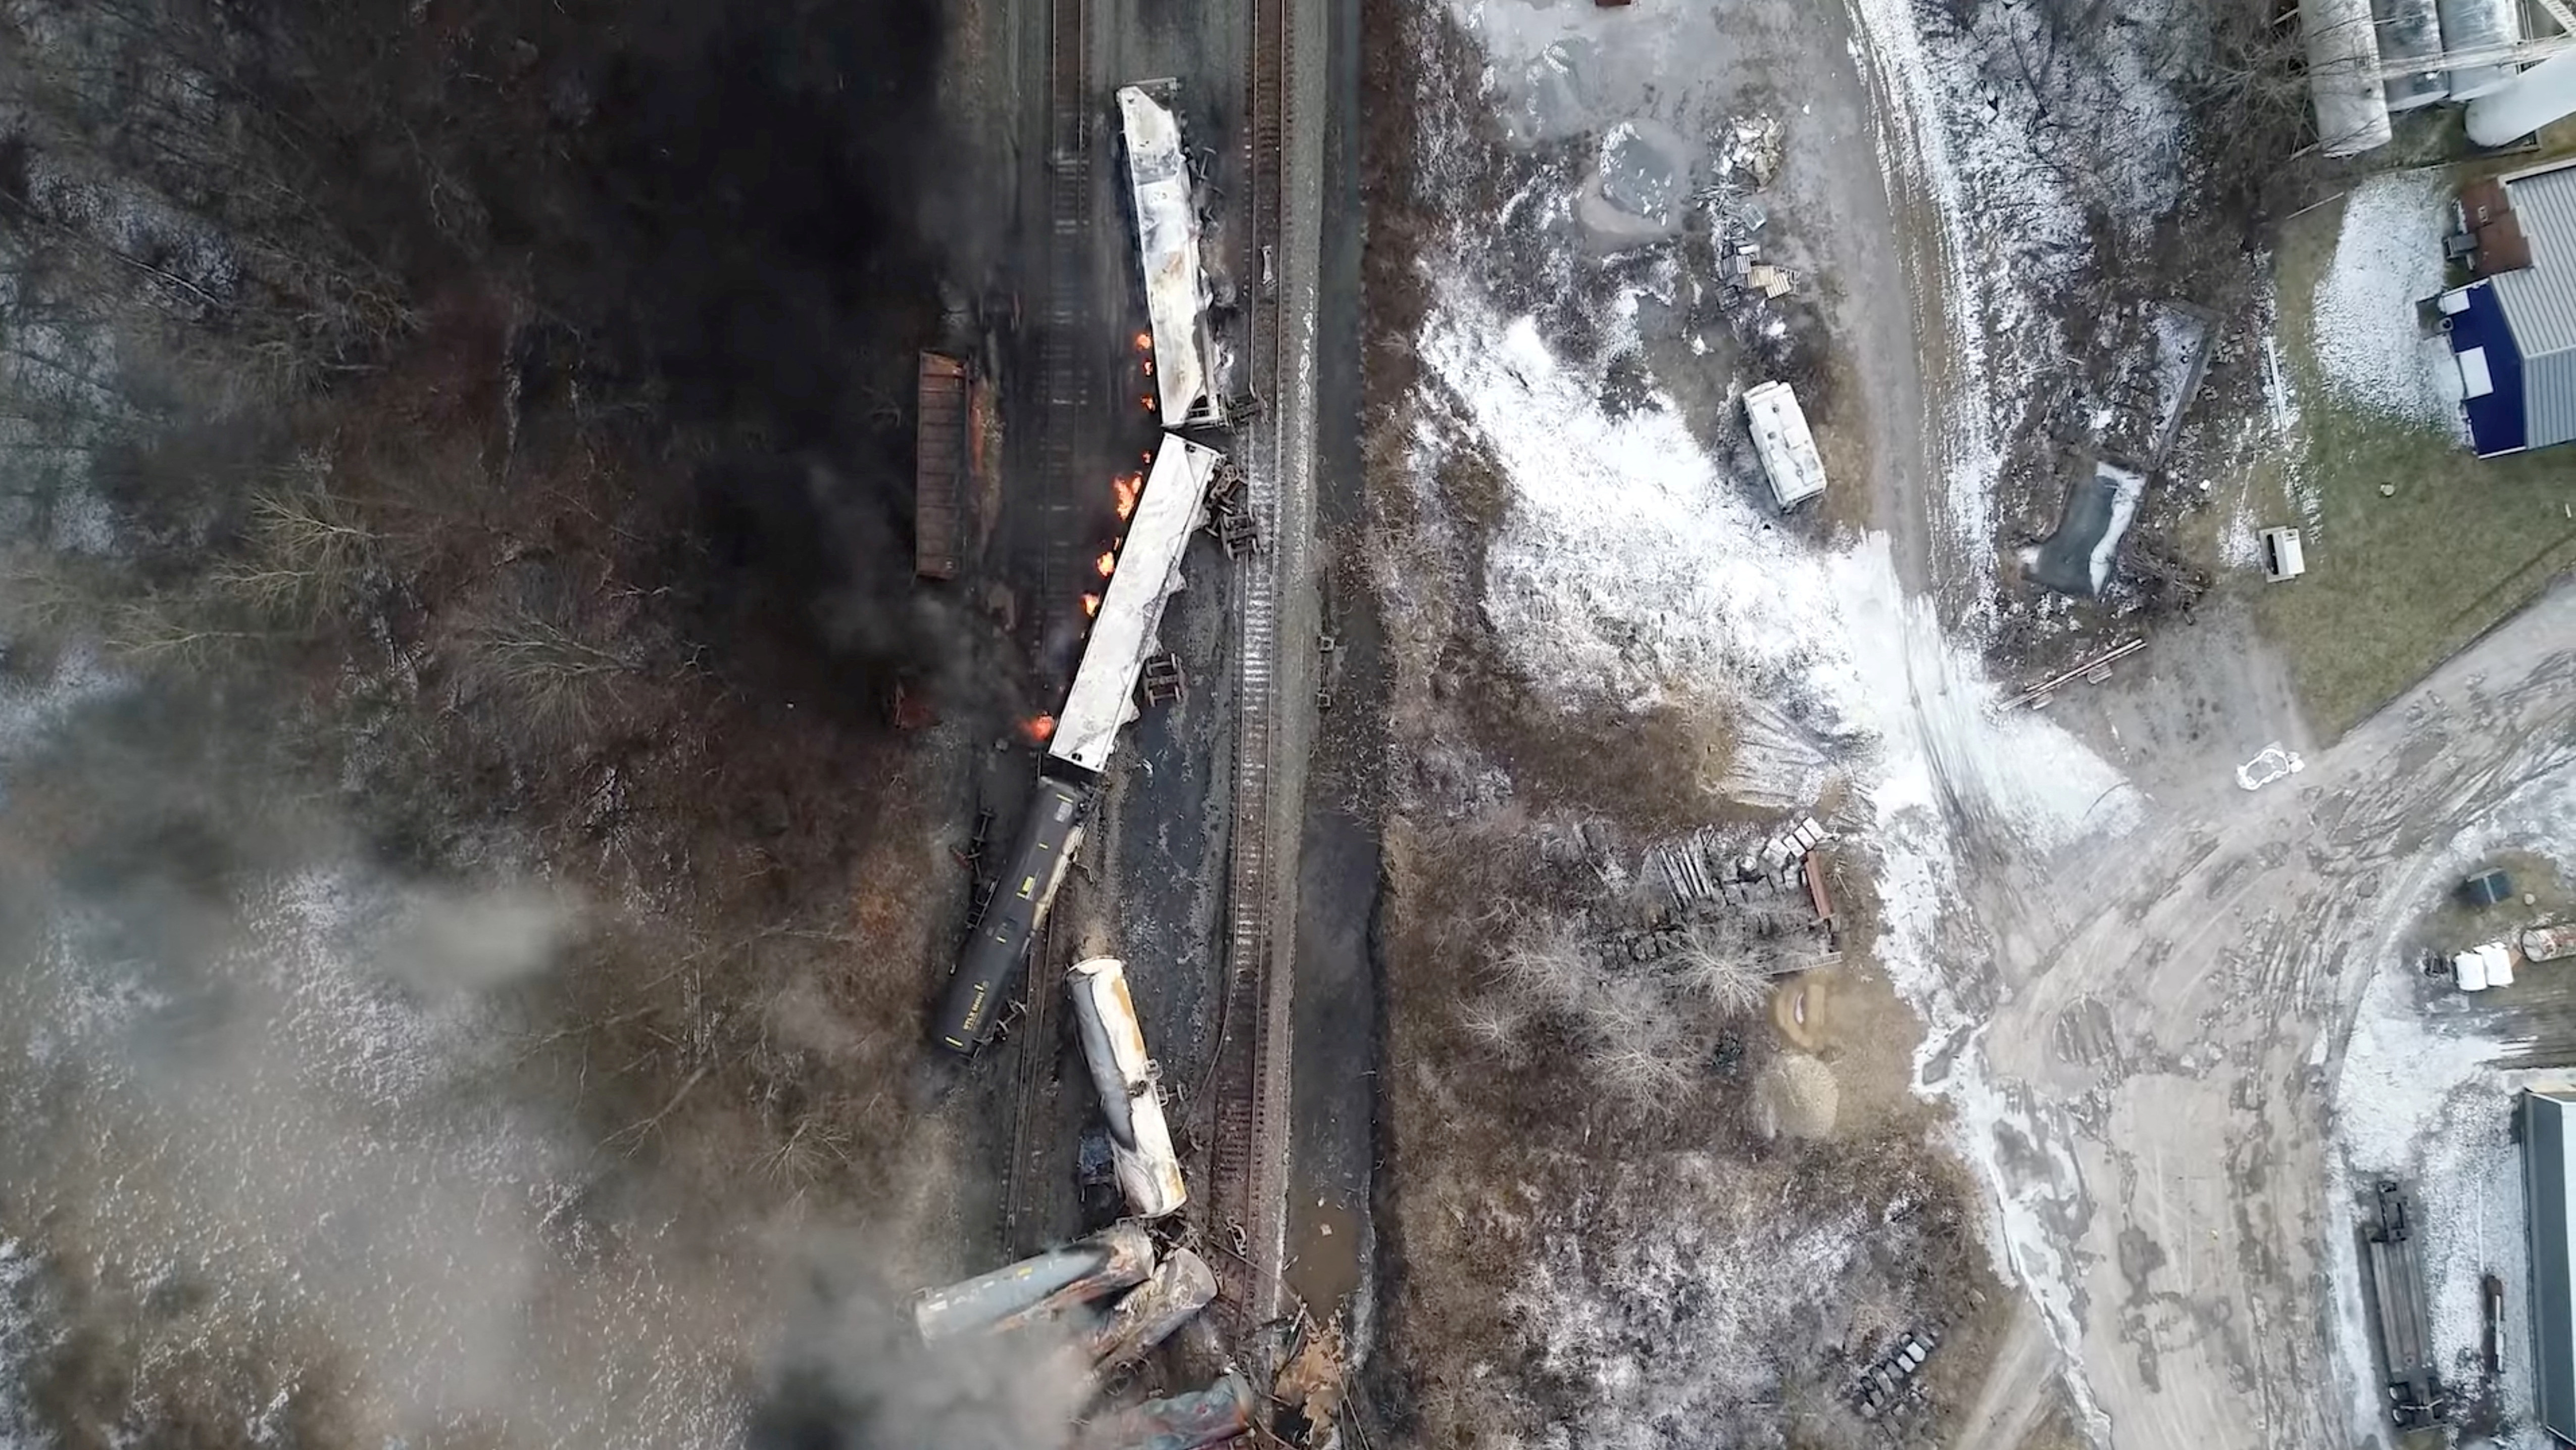 Ohio cleaning up toxic train derailment as pollution 'plume' moves downstream | Reuters